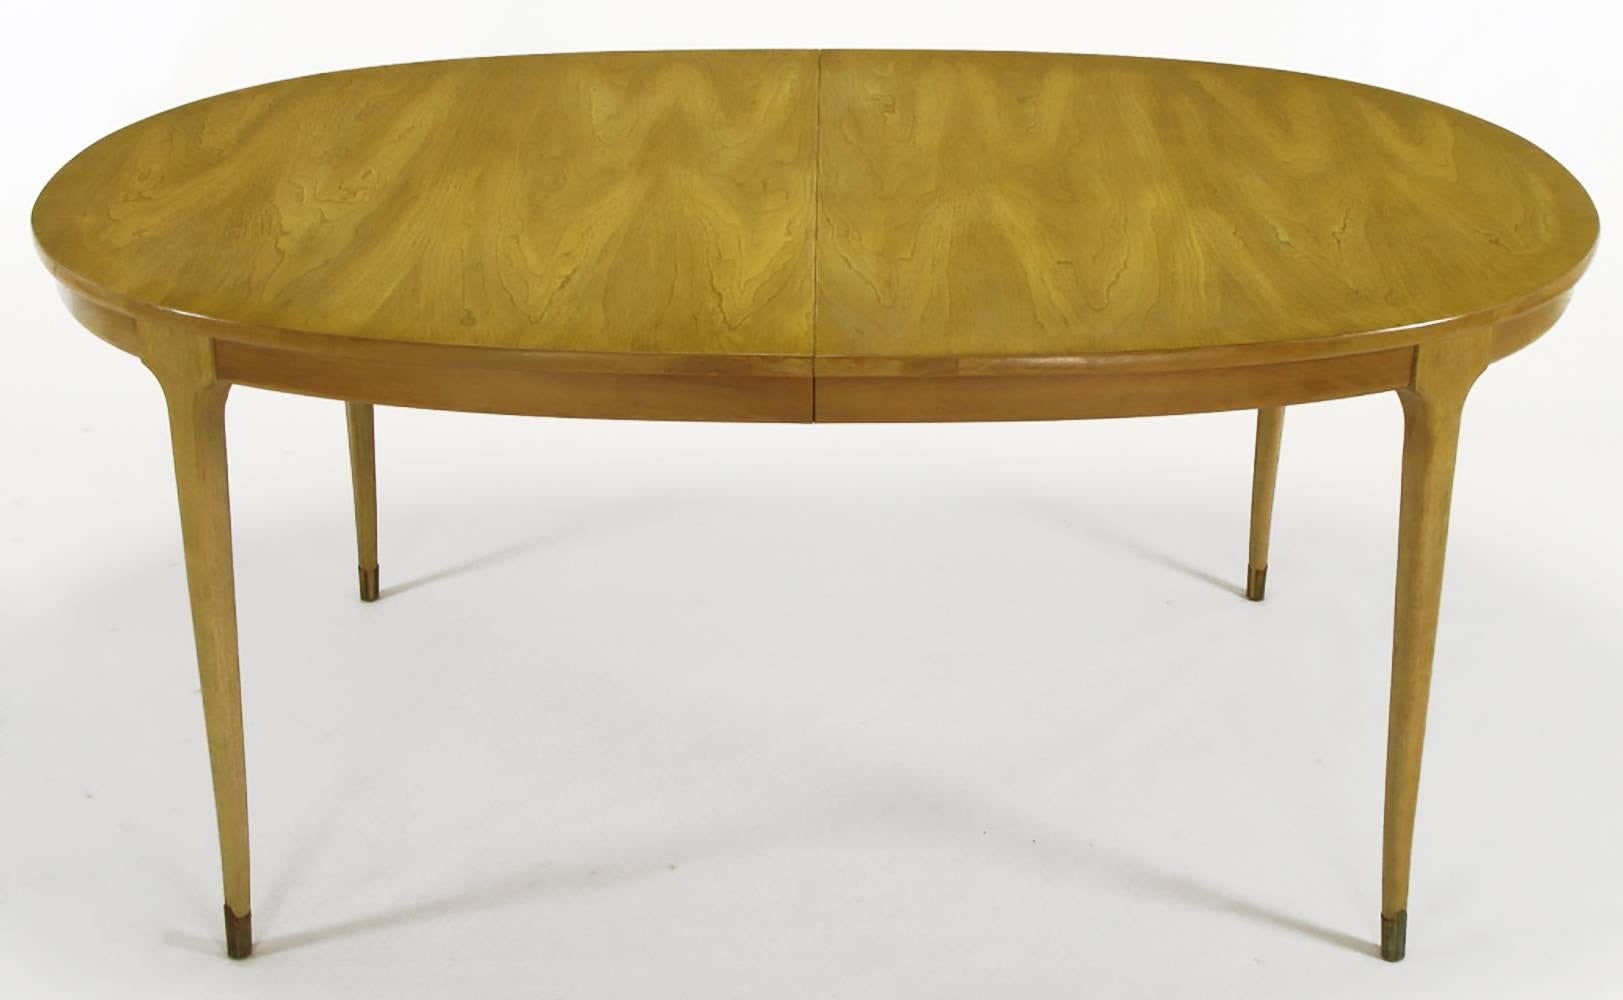 Bleached and figured walnut Classic, 1950s dining table in the manner of Harvey Probber. Clean tapered legs with slight saber curve and brass sabots. Beautifully figured wood grained top with two 16